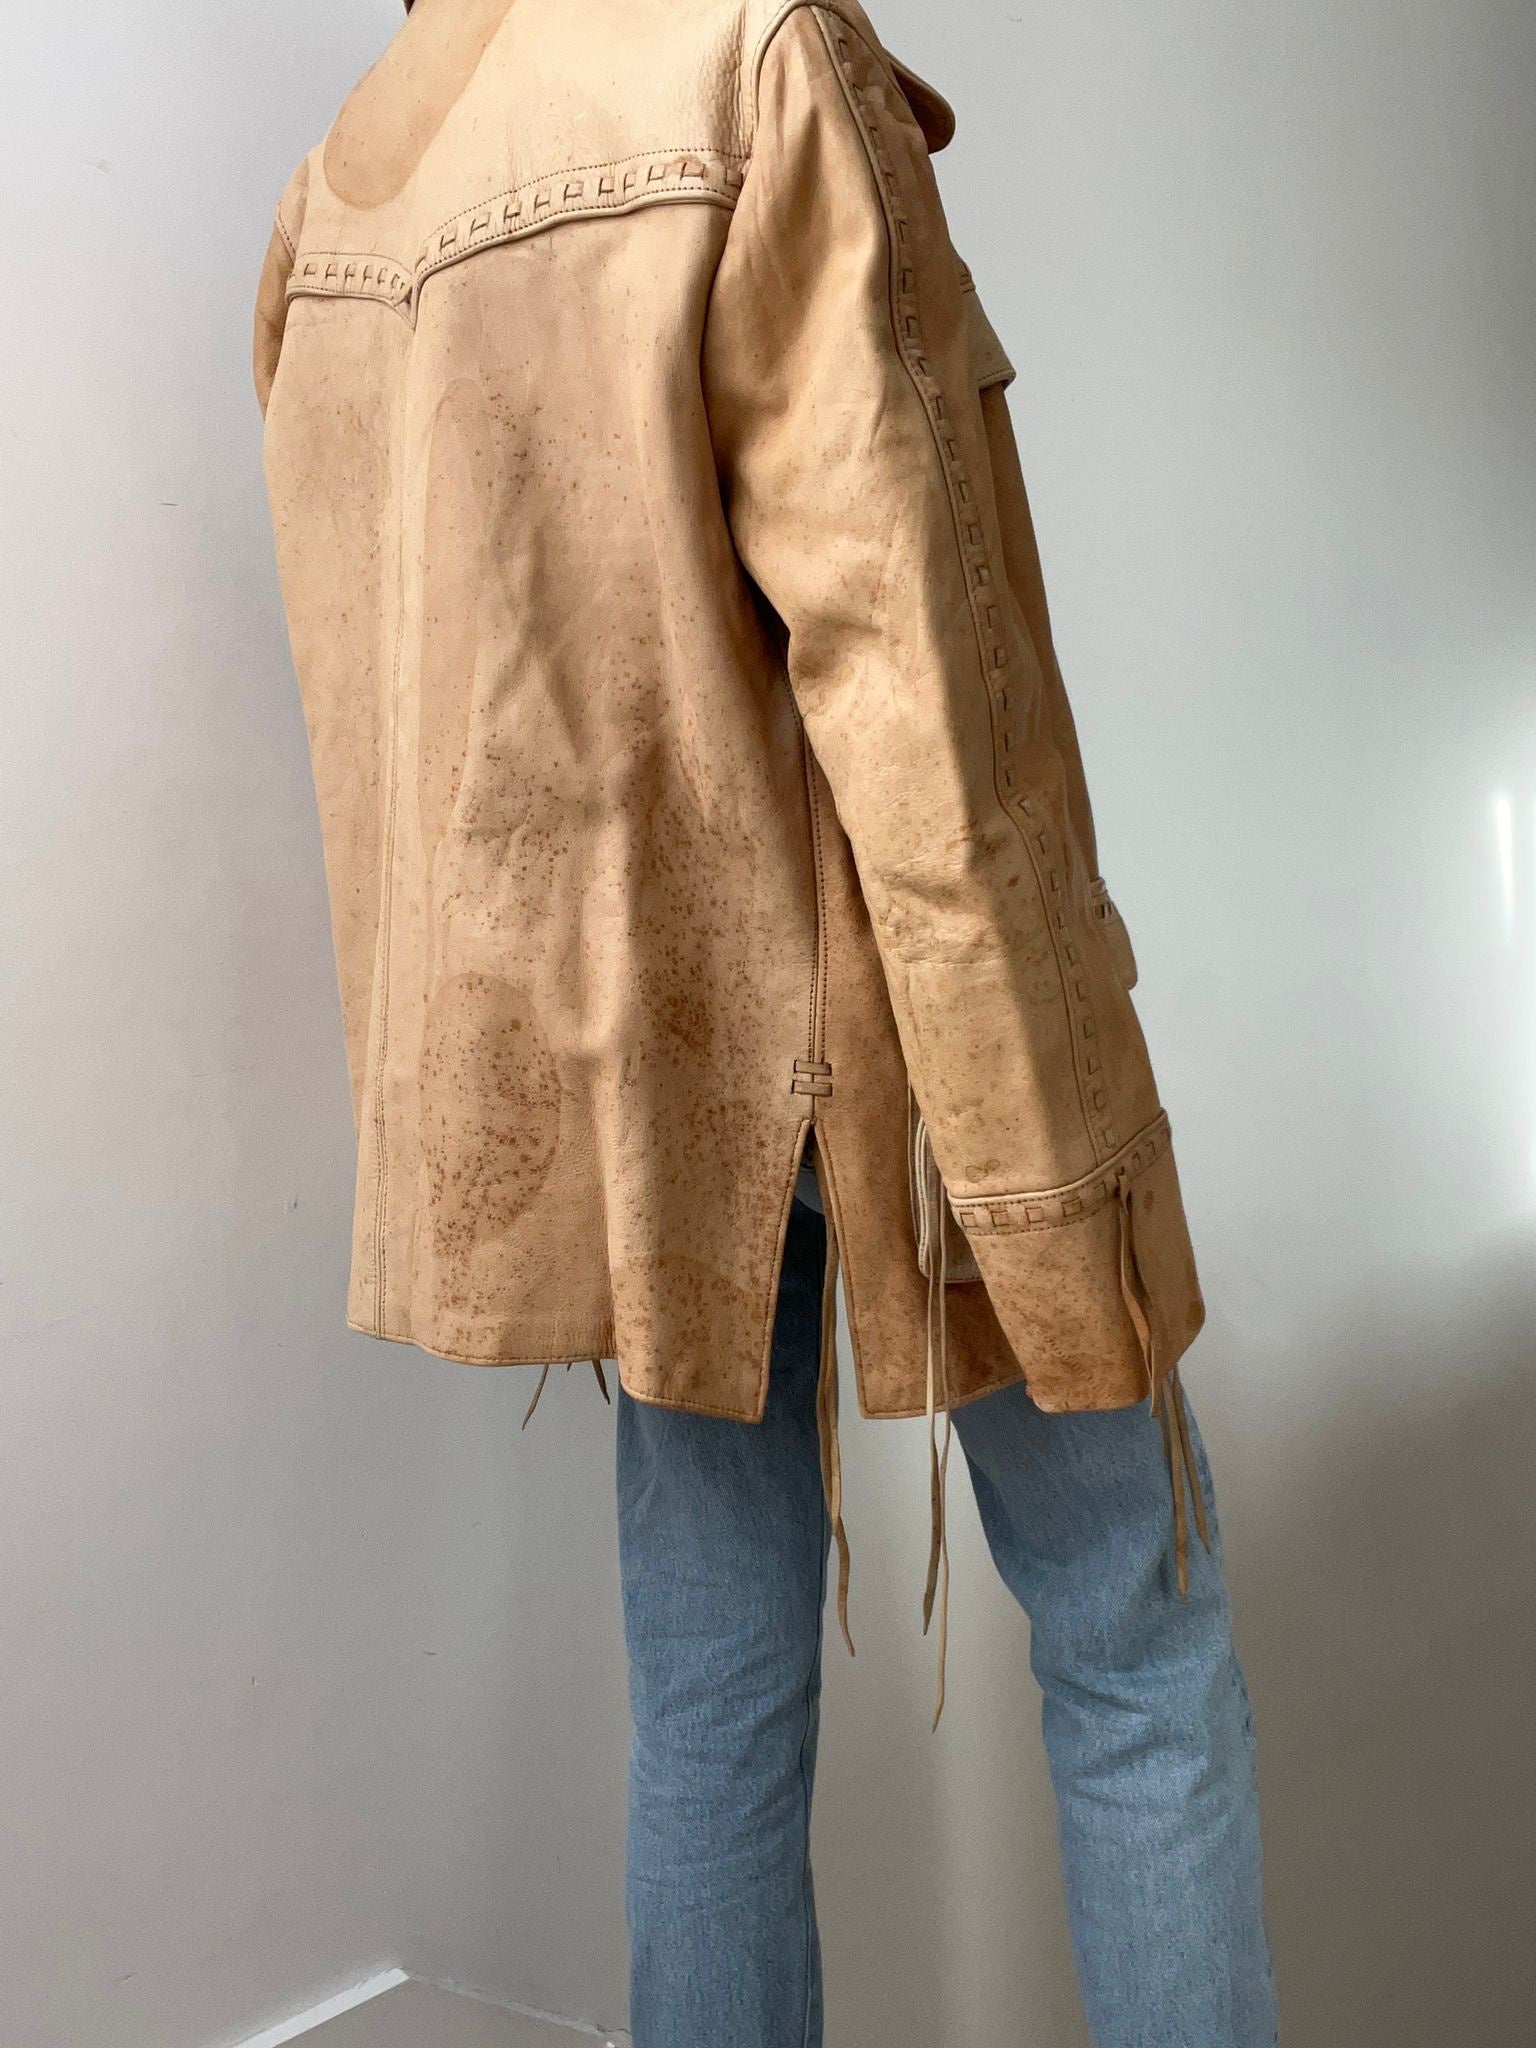 Not specified Jackets XLarge Vintage Soft Tan Leather Jacket with Tassels